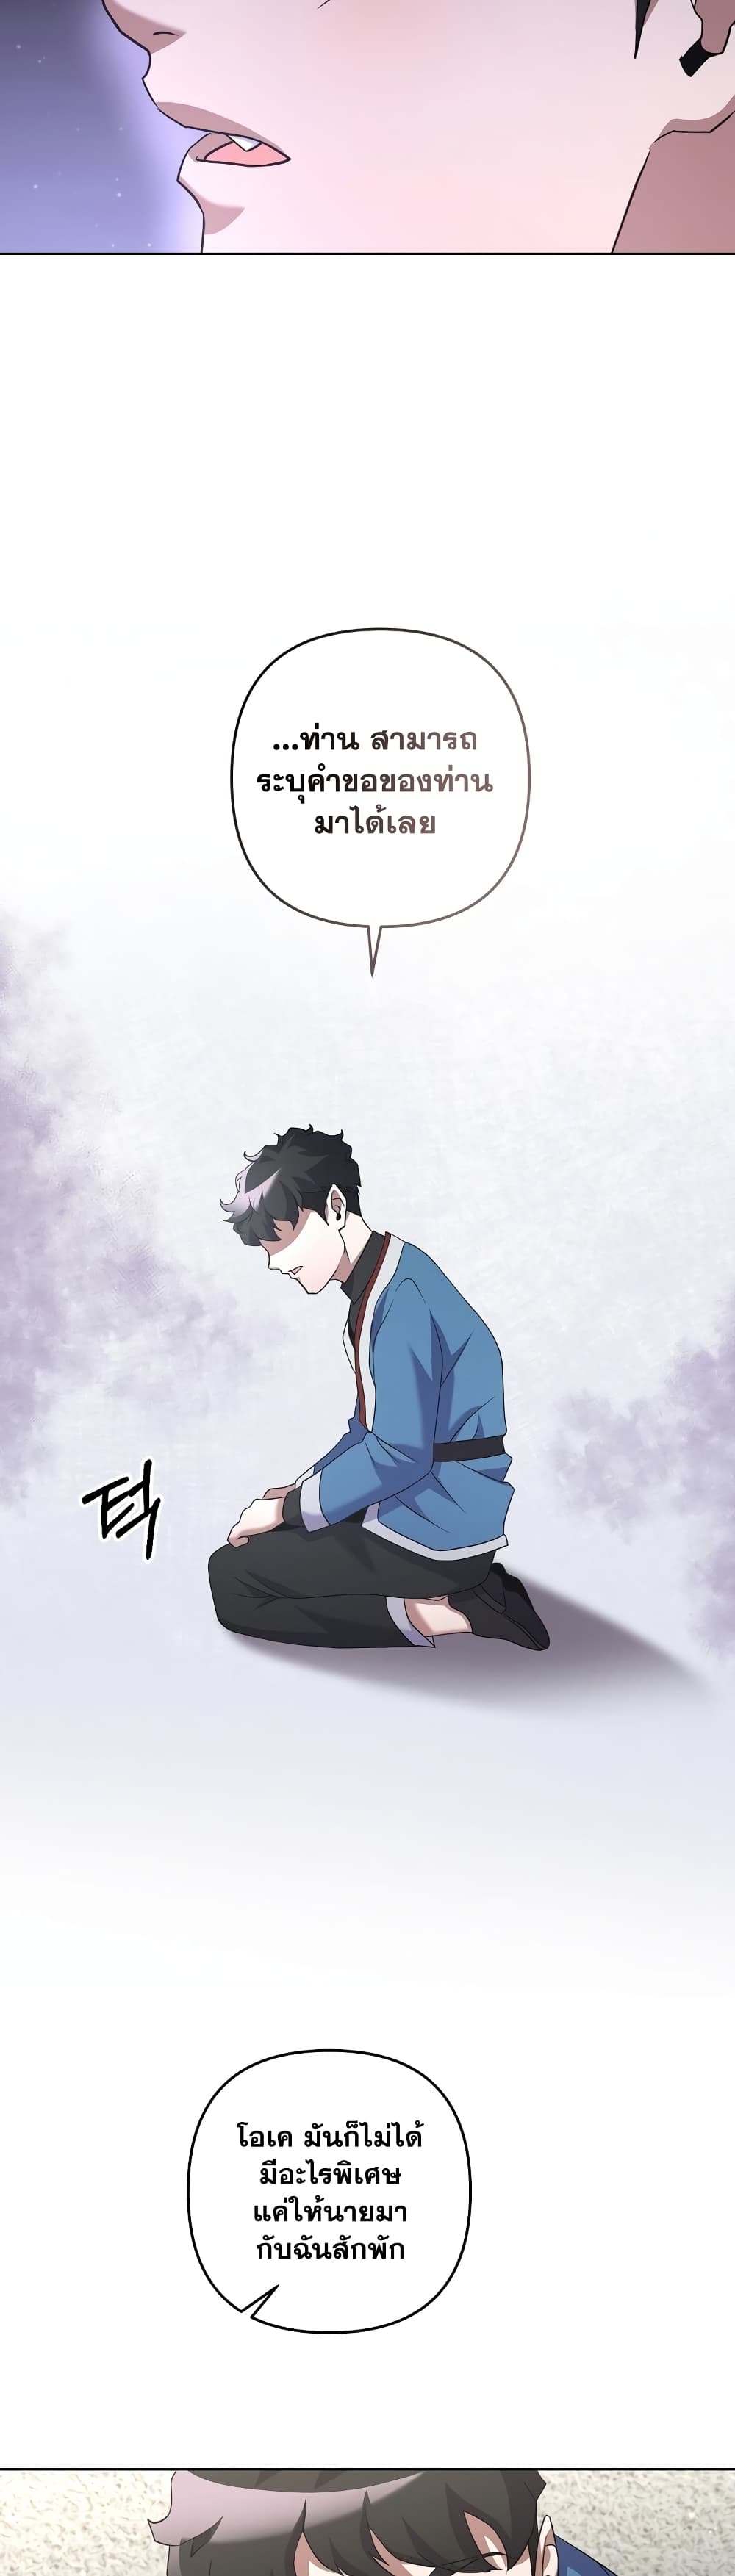 Surviving in an Action Manhwa22 (6)